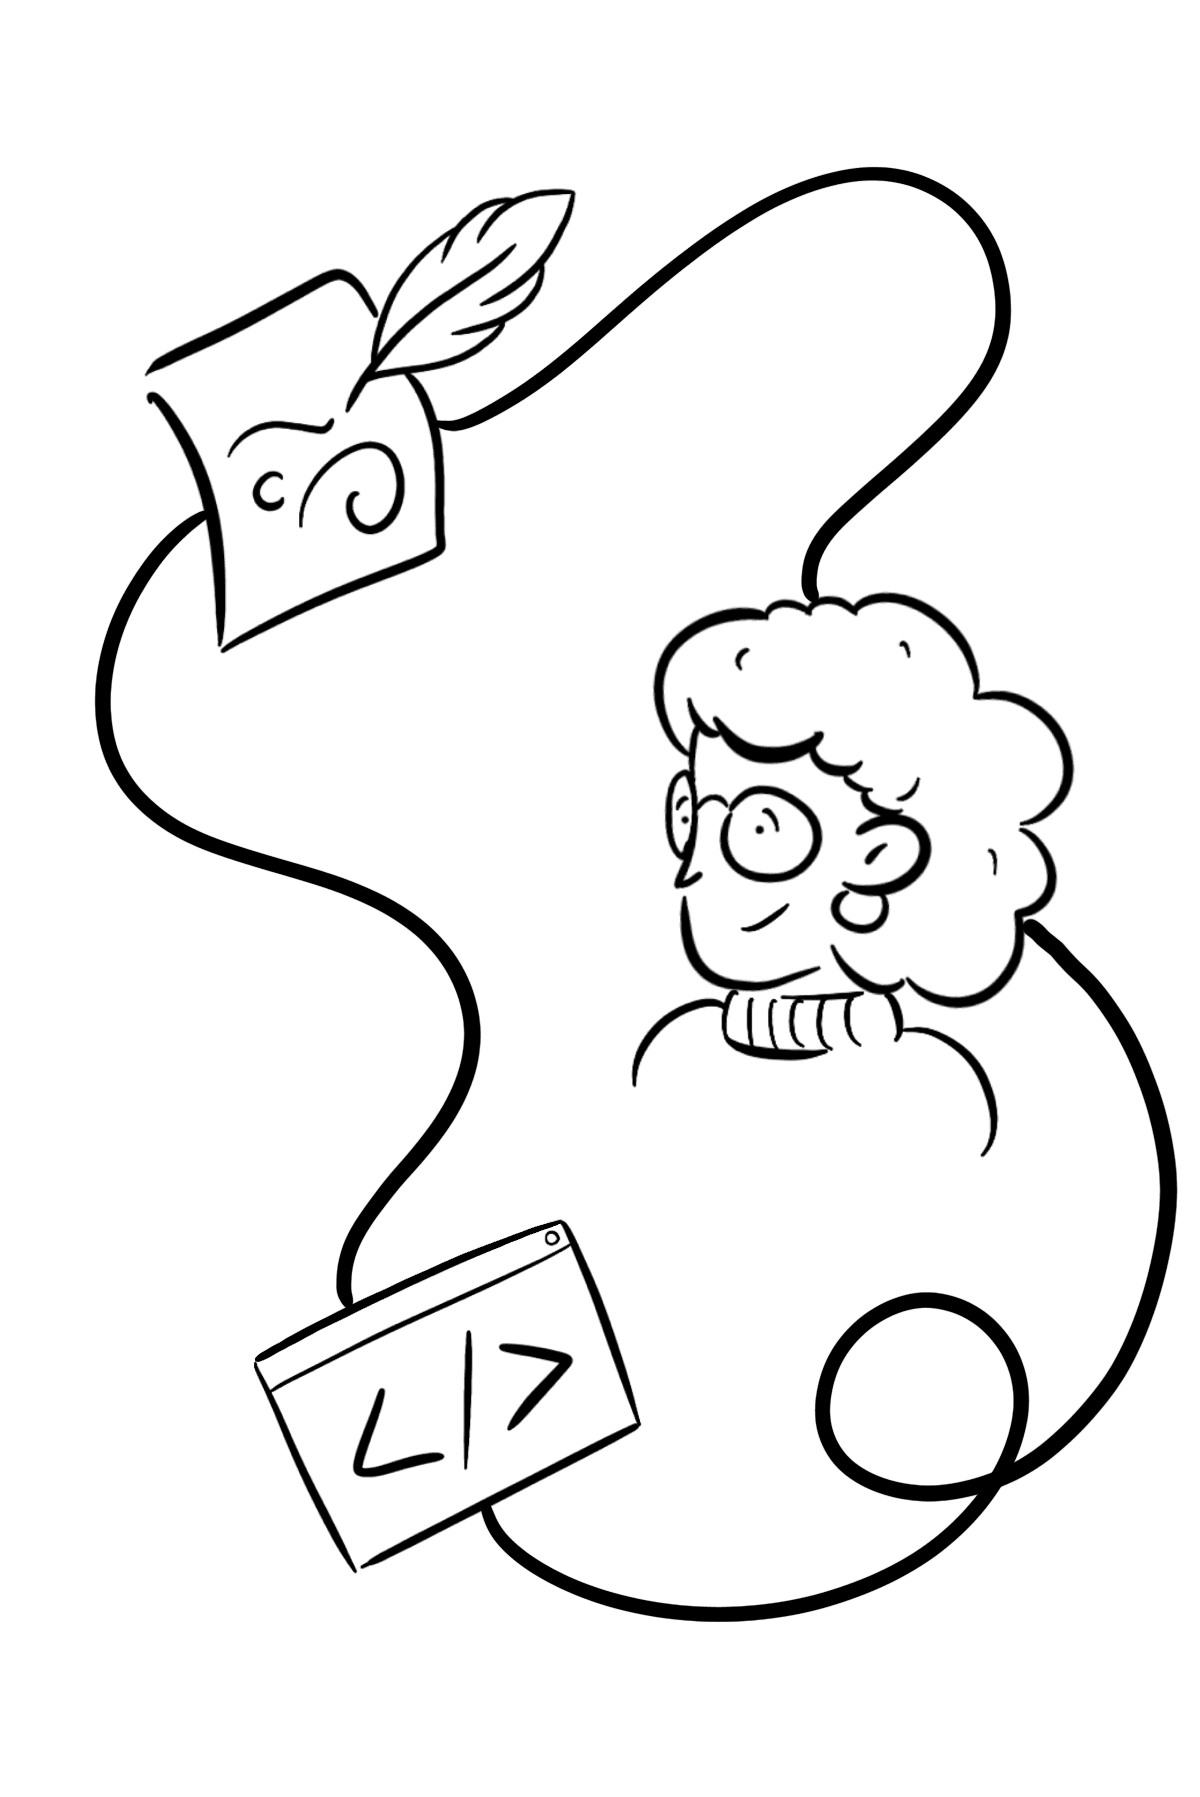 Paper with a quill drawing, an older lady with glasses, and a screen with html markup all connected to eachother